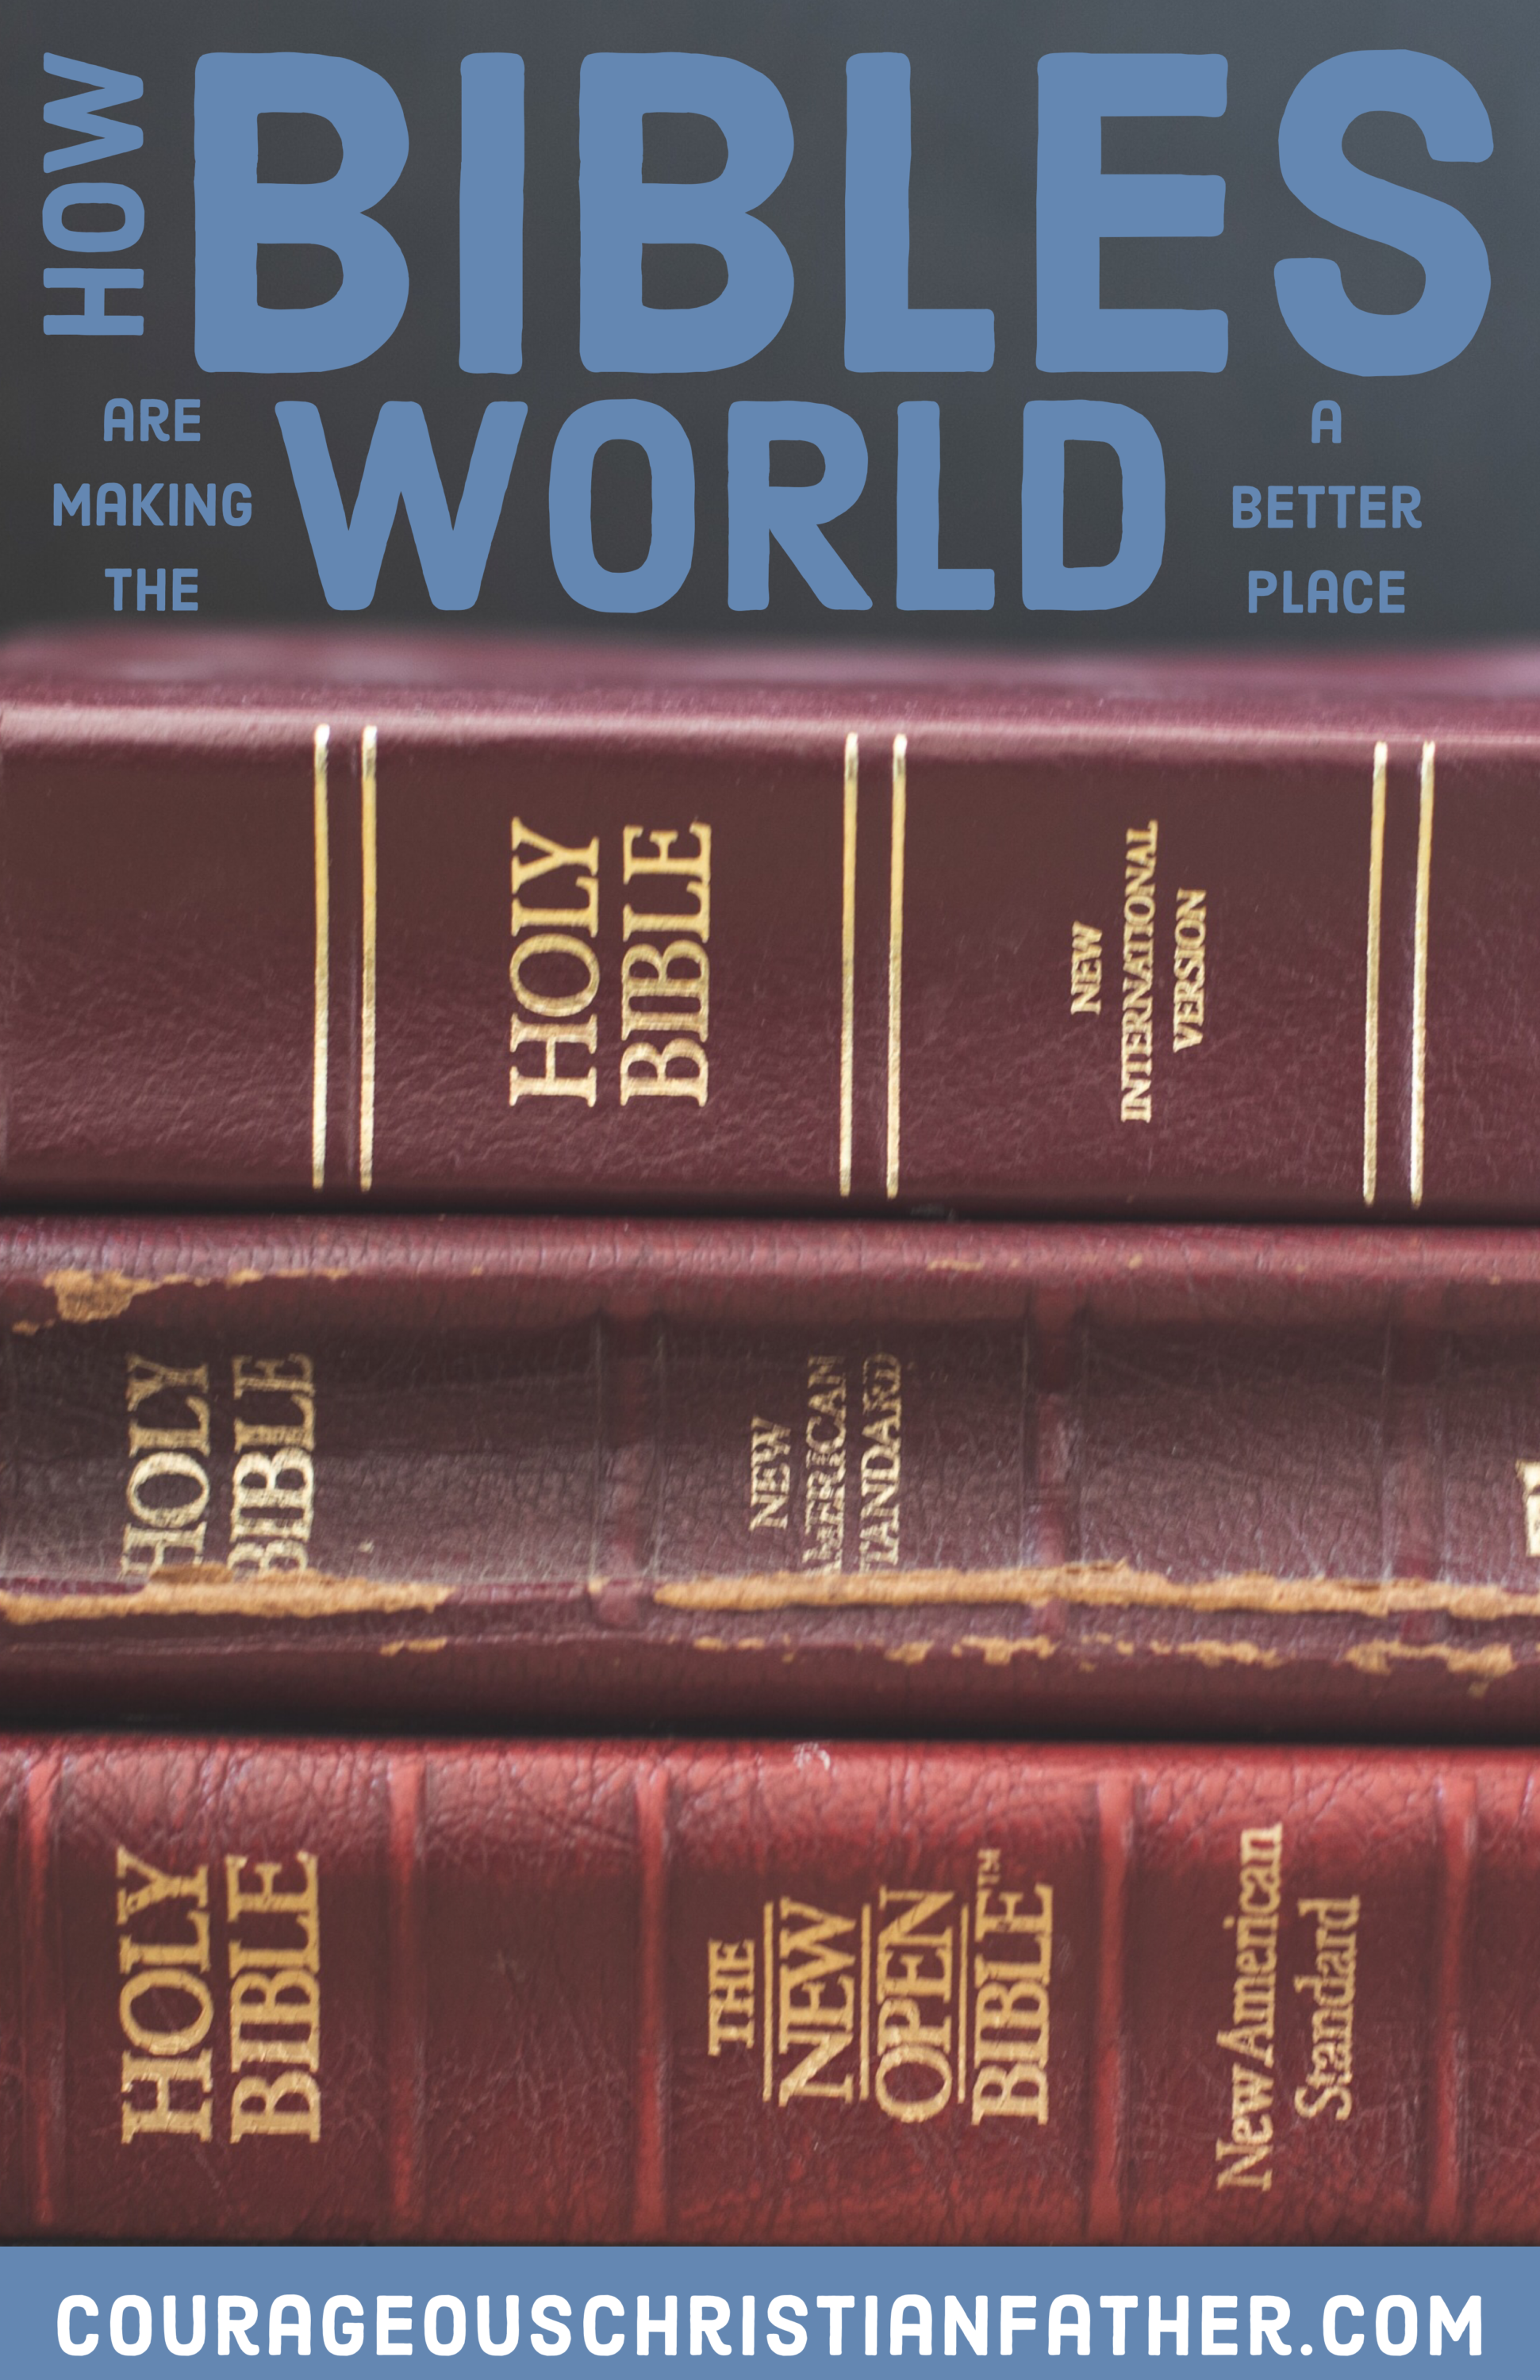 How Bibles are making the World a Better Place - I share a blog post about the Bible and making the world a better place. #Bible 